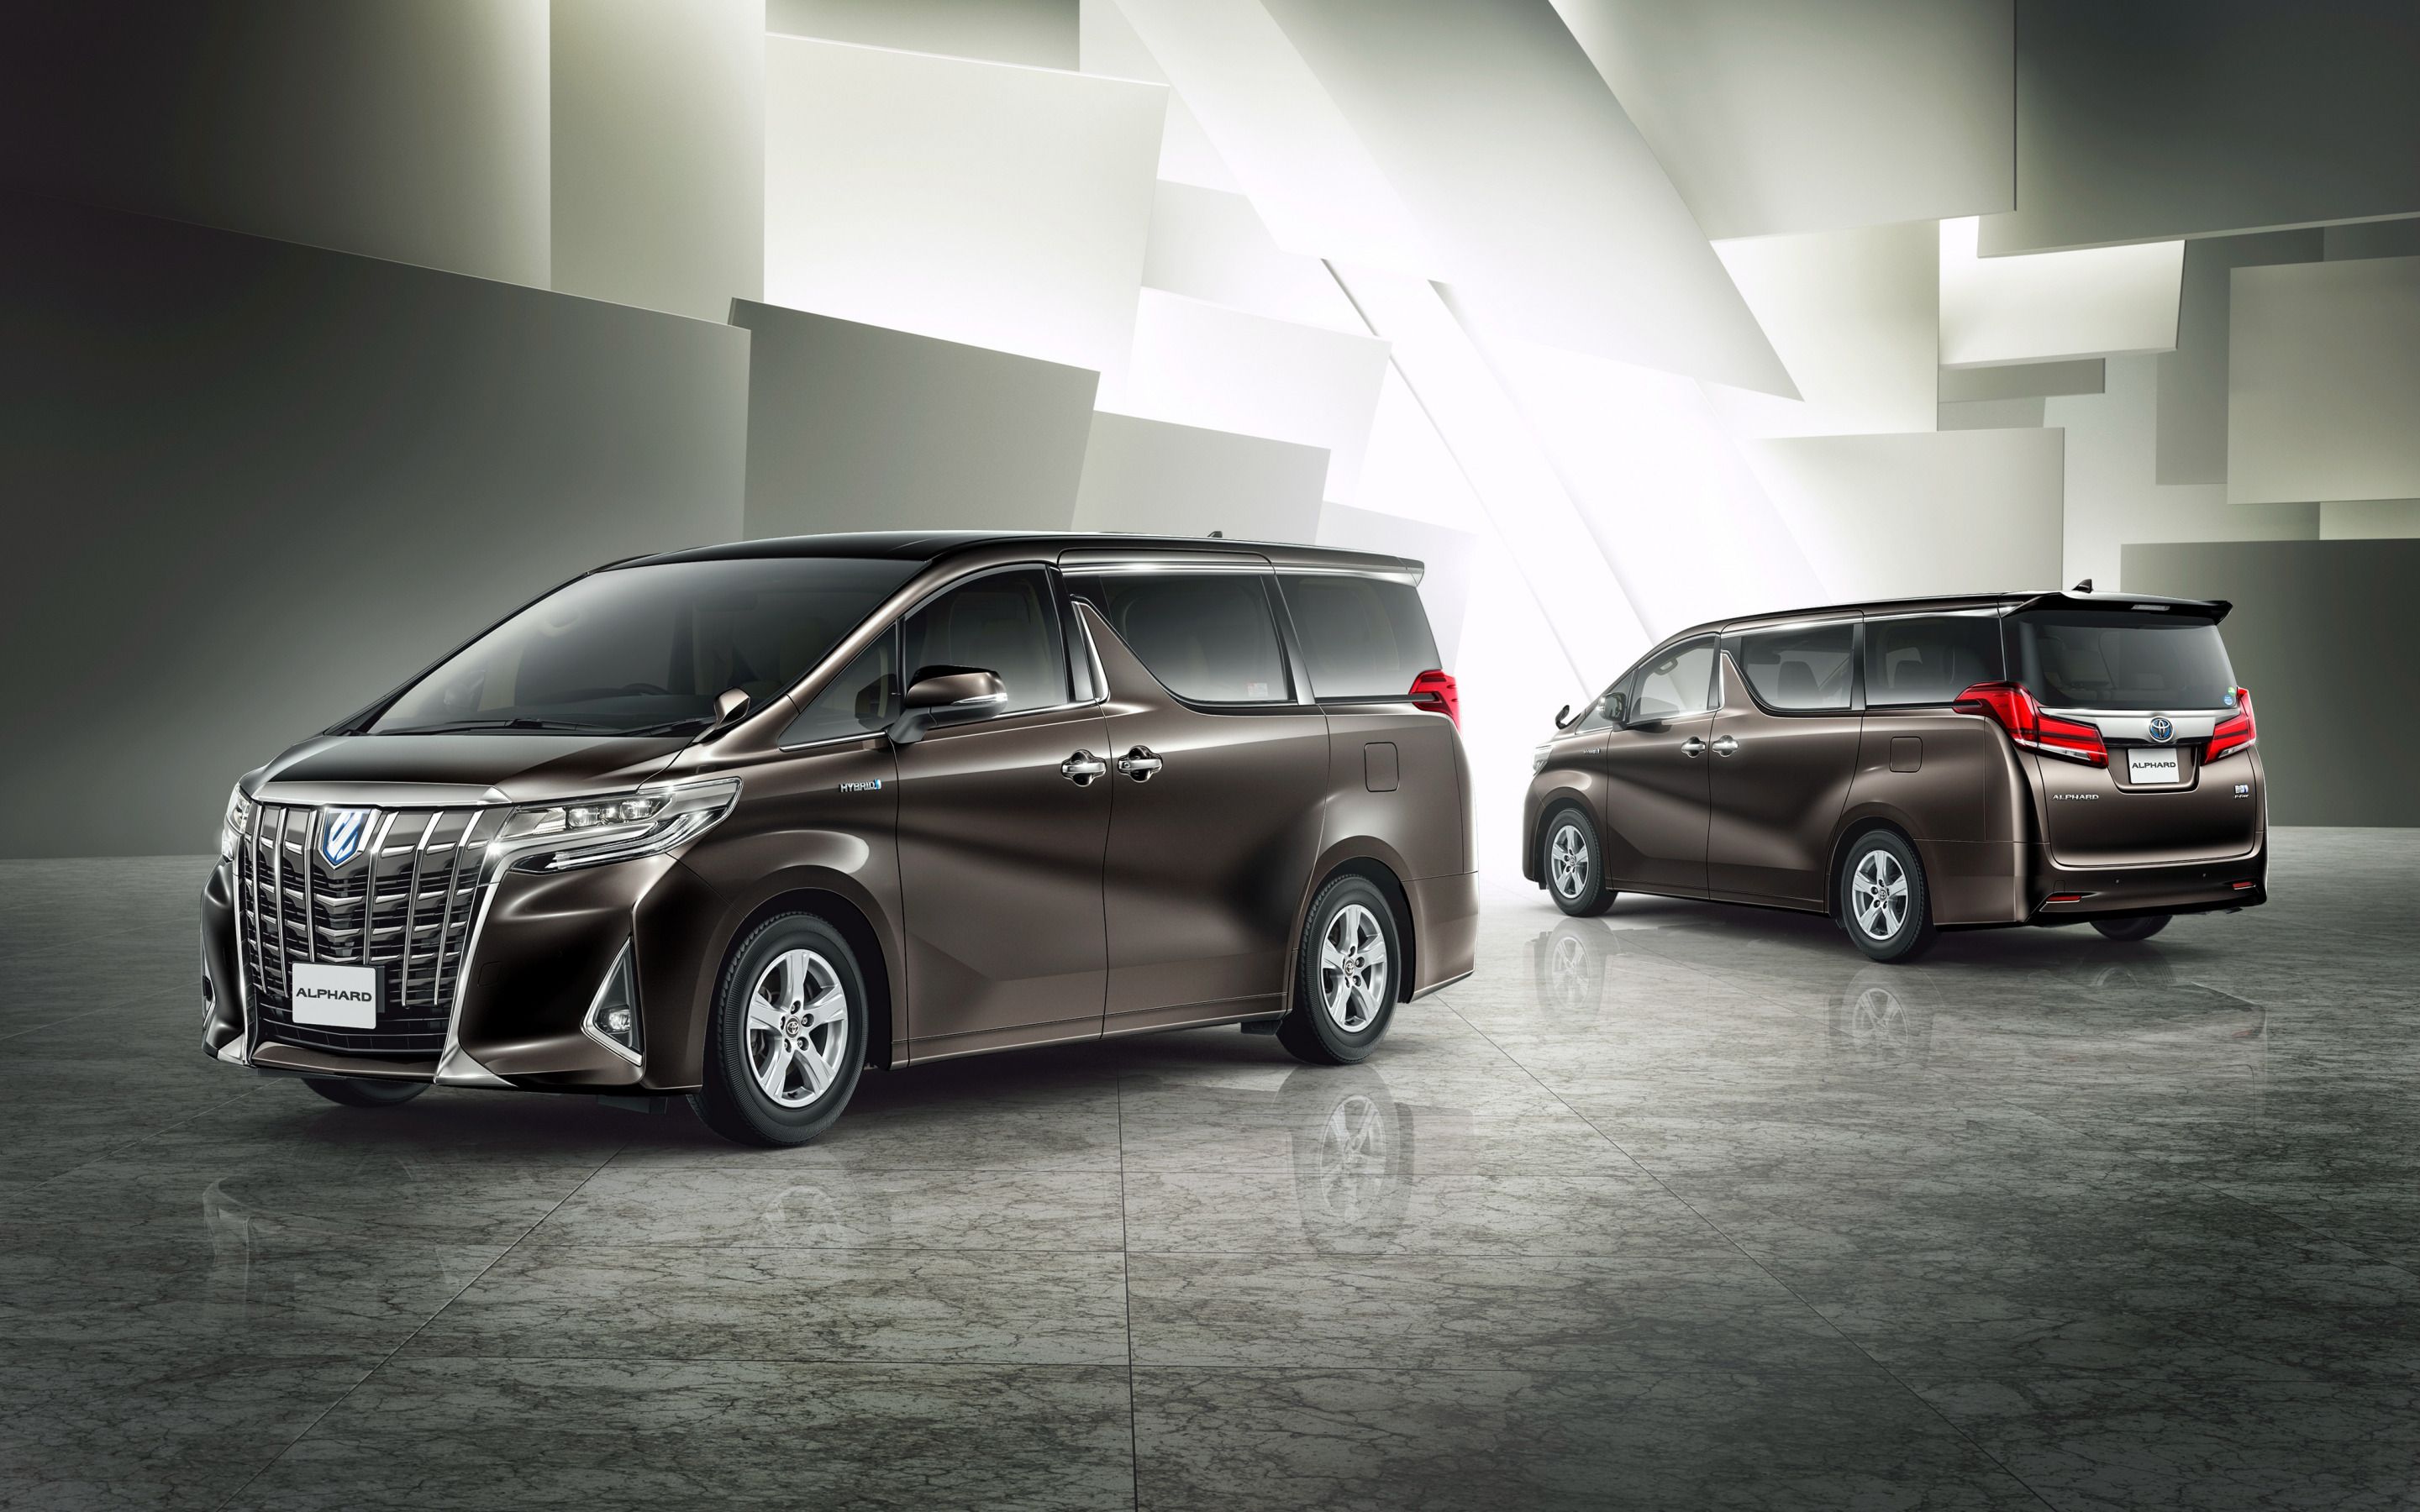 Download wallpapers Toyota Alphard, 2020, exterior, luxury minibus, front view, new brown Alphard, japanese cars, Toyota for desktop with resolution 2880x1800. High Quality HD pictures wallpapers